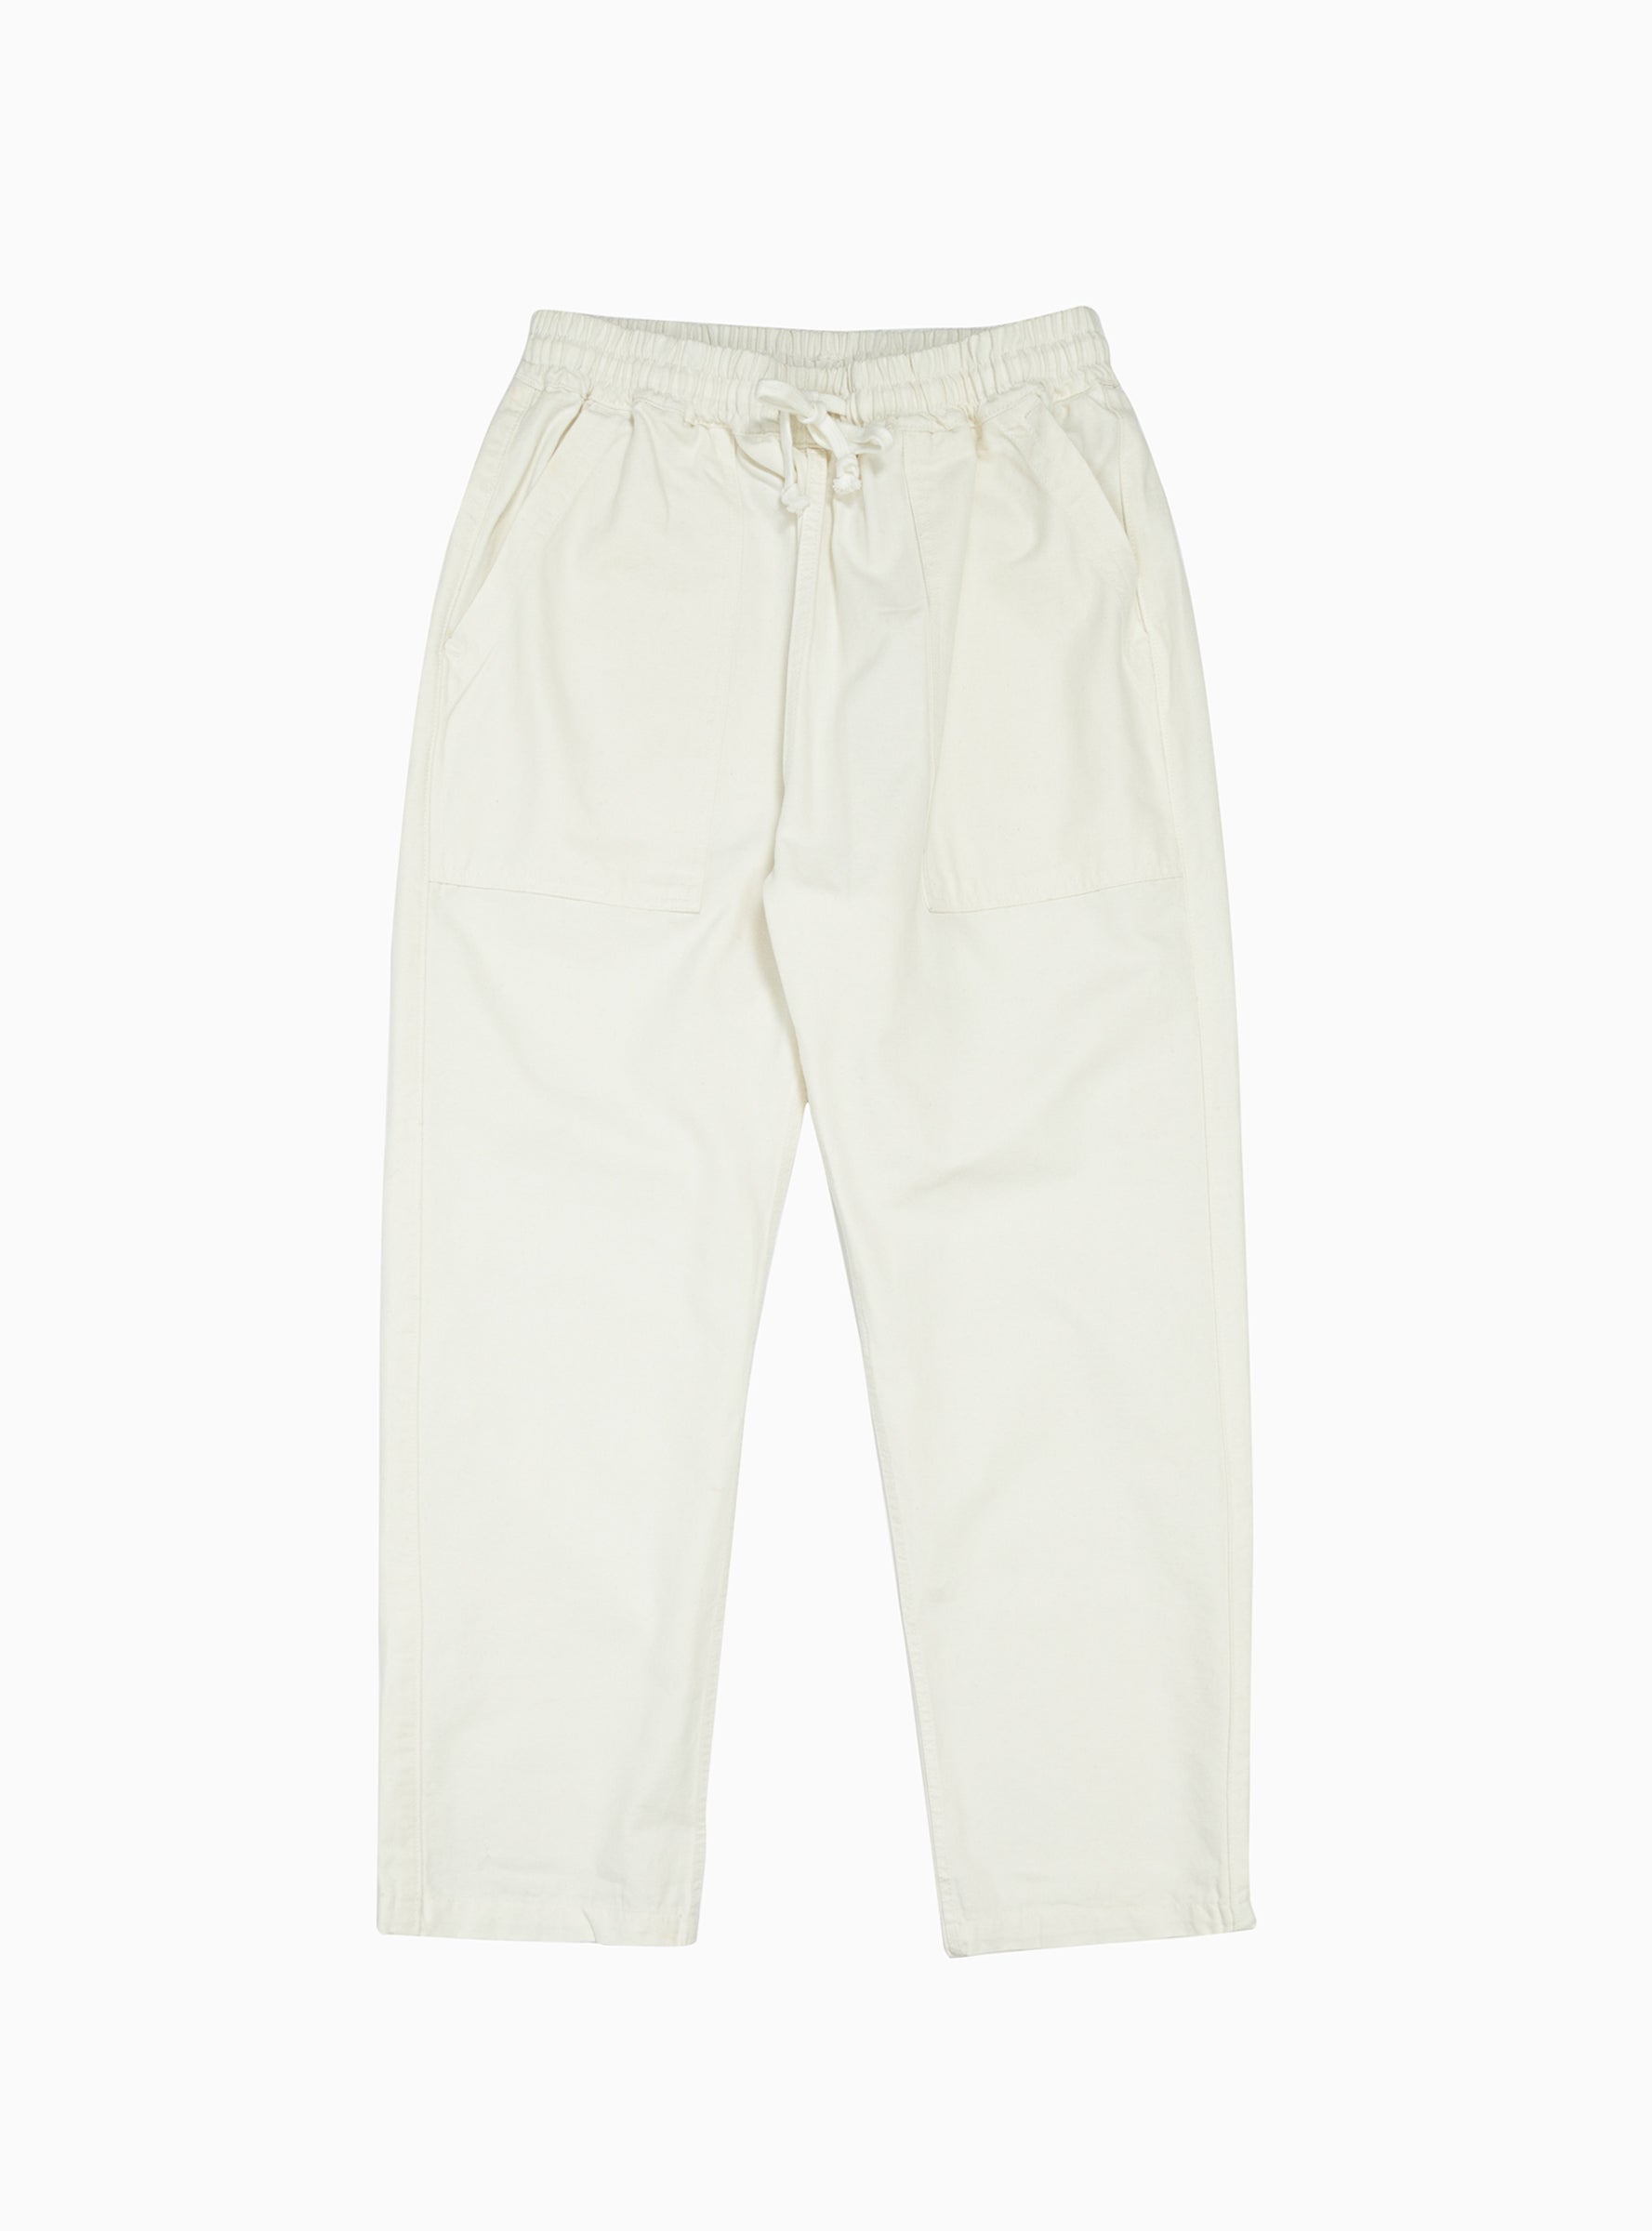 Service Works Service Works Classic Chef Trousers Off White - Size: XL